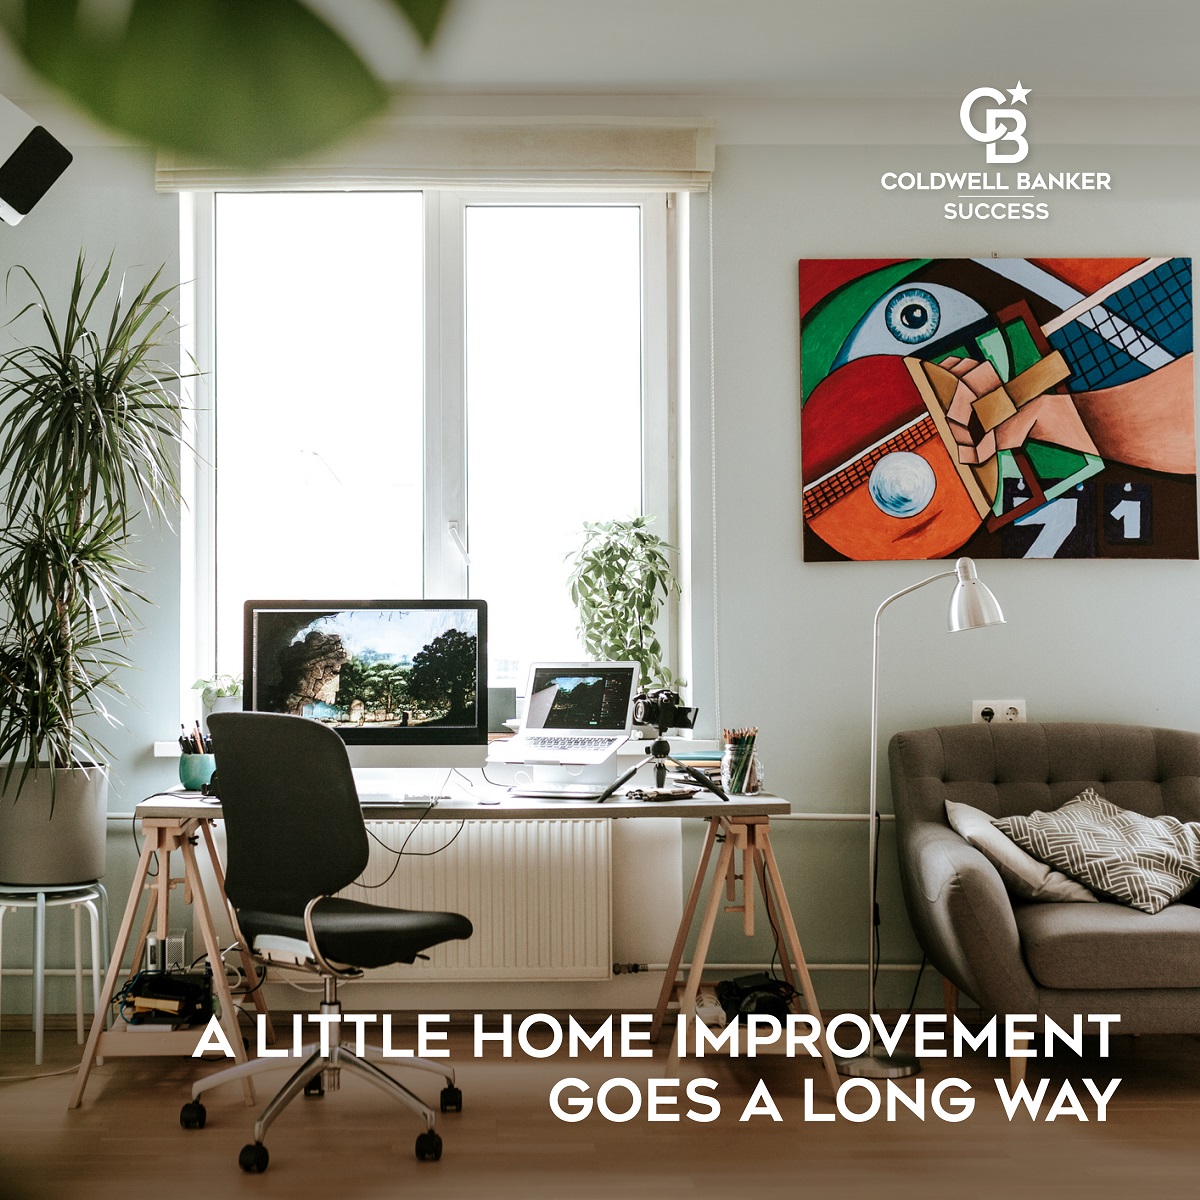 Tip Image: A little home improvement goes a long way